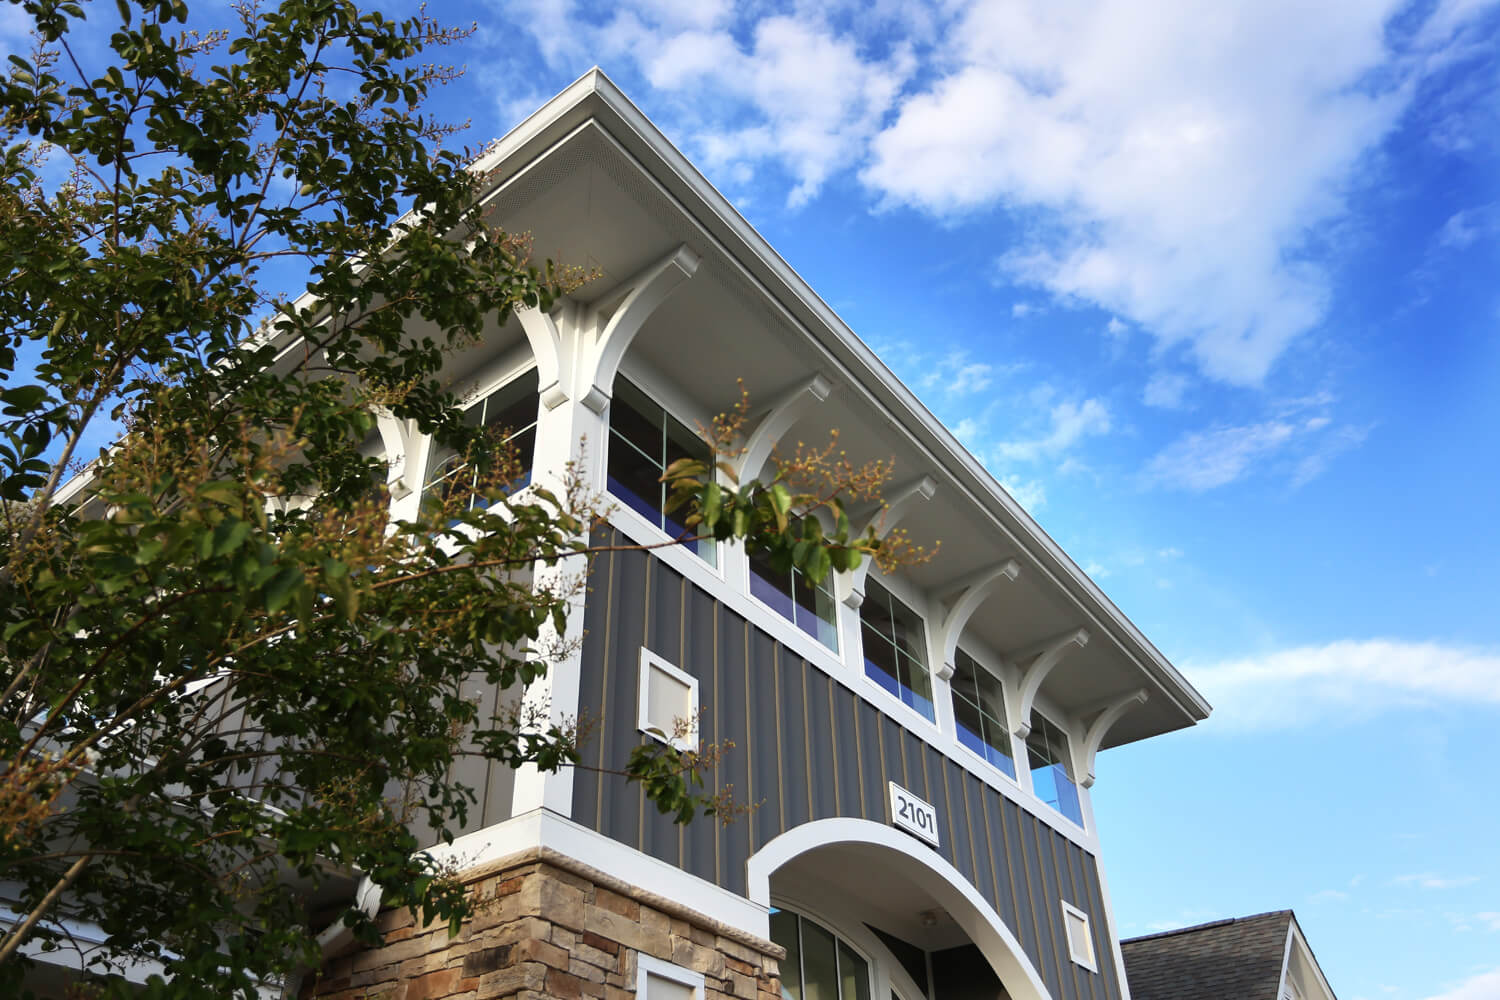 The Morgan Apartments Clubhouse Designed by Foshee Architecture - Exterior View of the Tower